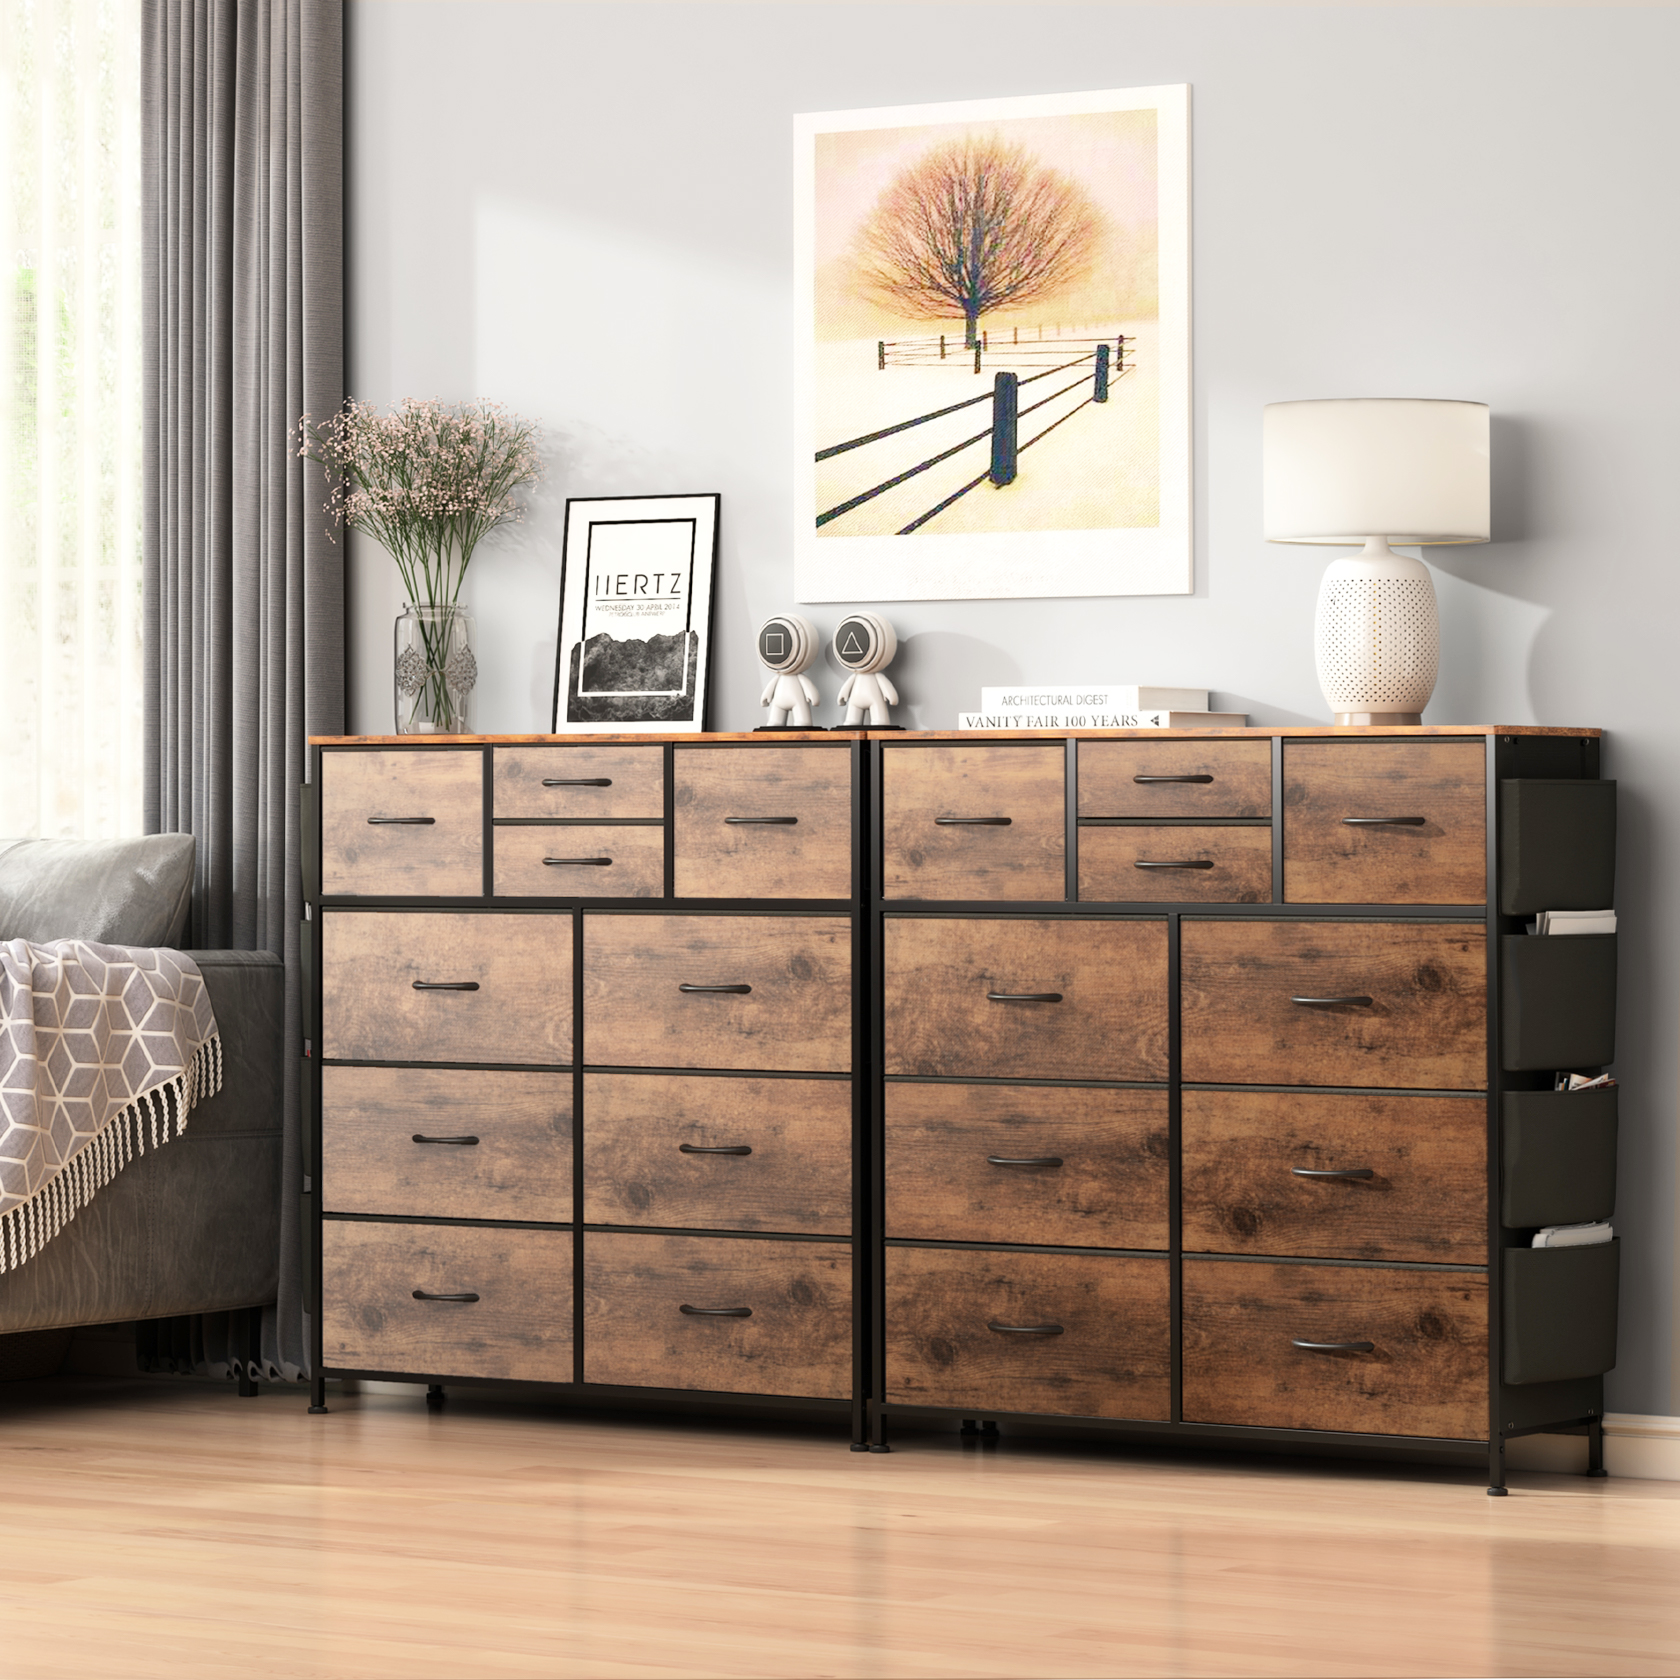 GIKPAL 10 Drawer Dresser, Chest of Drawers for Bedroom Fabric Dressers with Side Pockets and Hooks, Brown - image 5 of 12